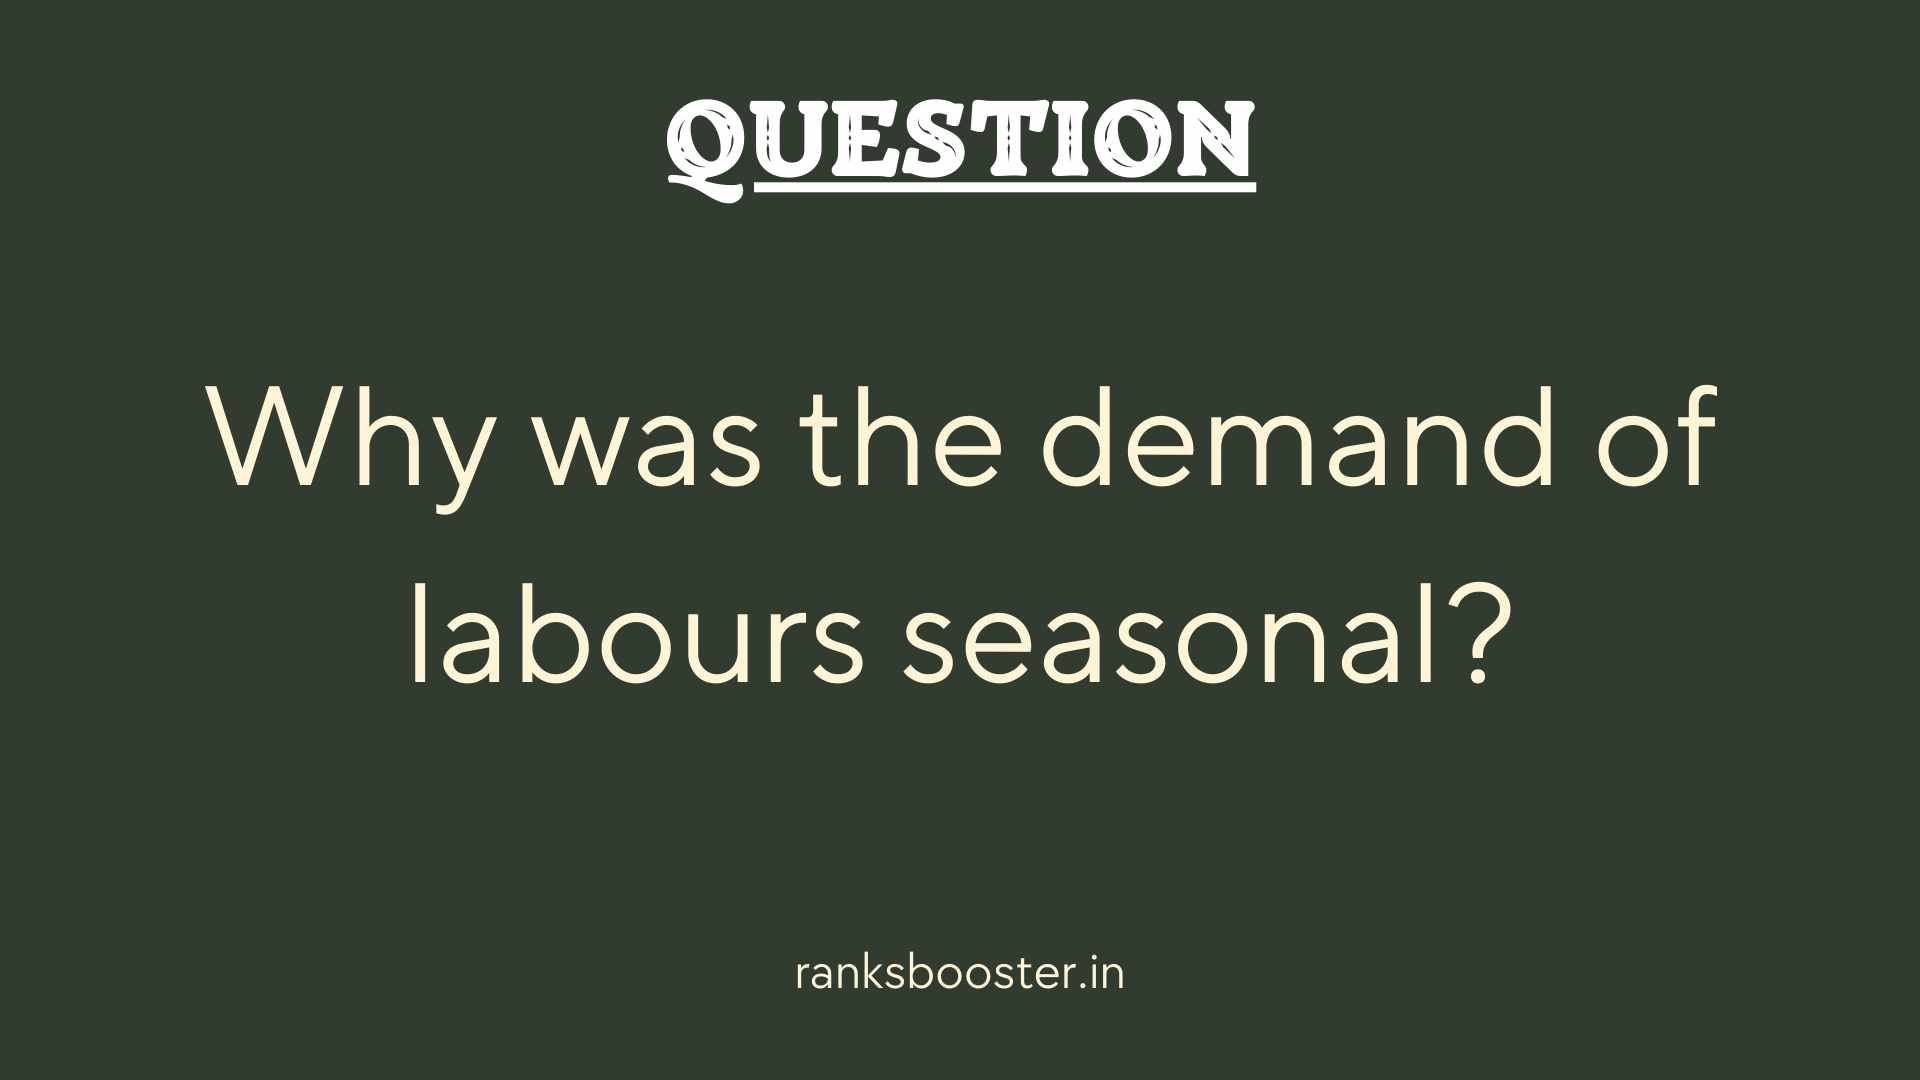 Question: Why was the demand of labours seasonal?